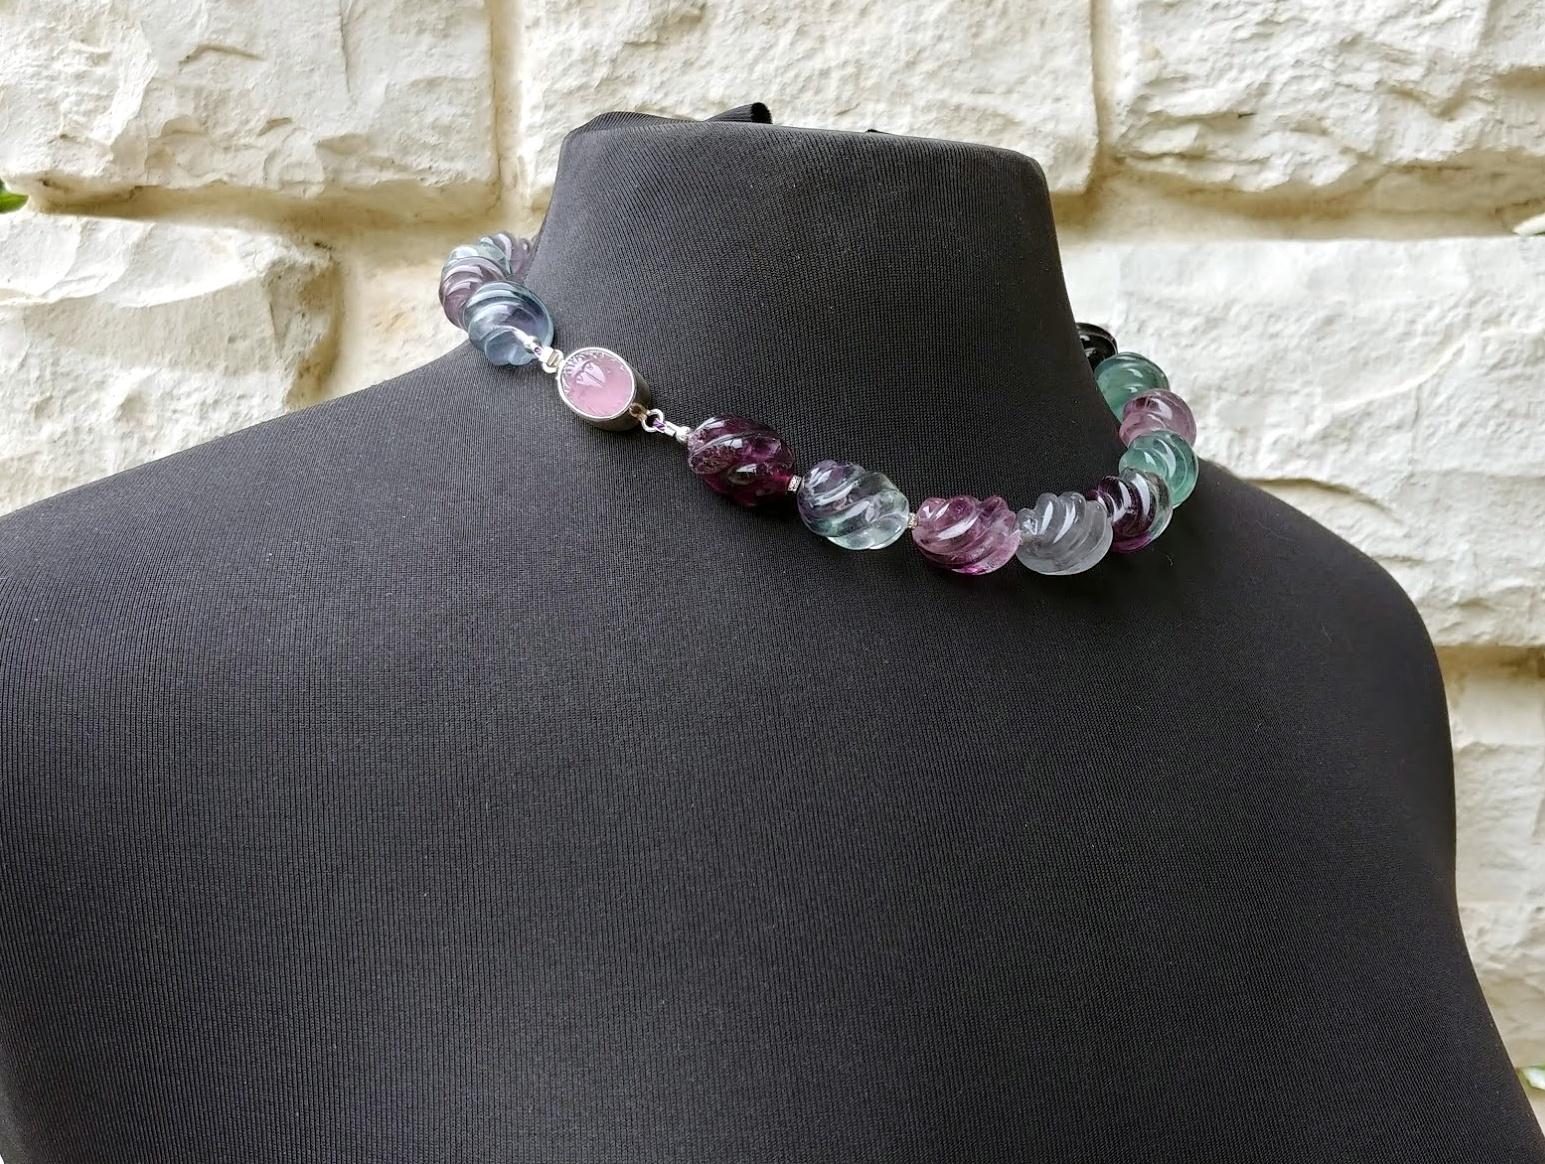 The length of the necklace is 18.5 inches (47 cm). The size of the fluted twist beads is 15 x 20 mm.
The fluted twist fluorite beads in this necklace range from crystal clear to jewel-tone purple and green.
This unusual mineral presents drastically